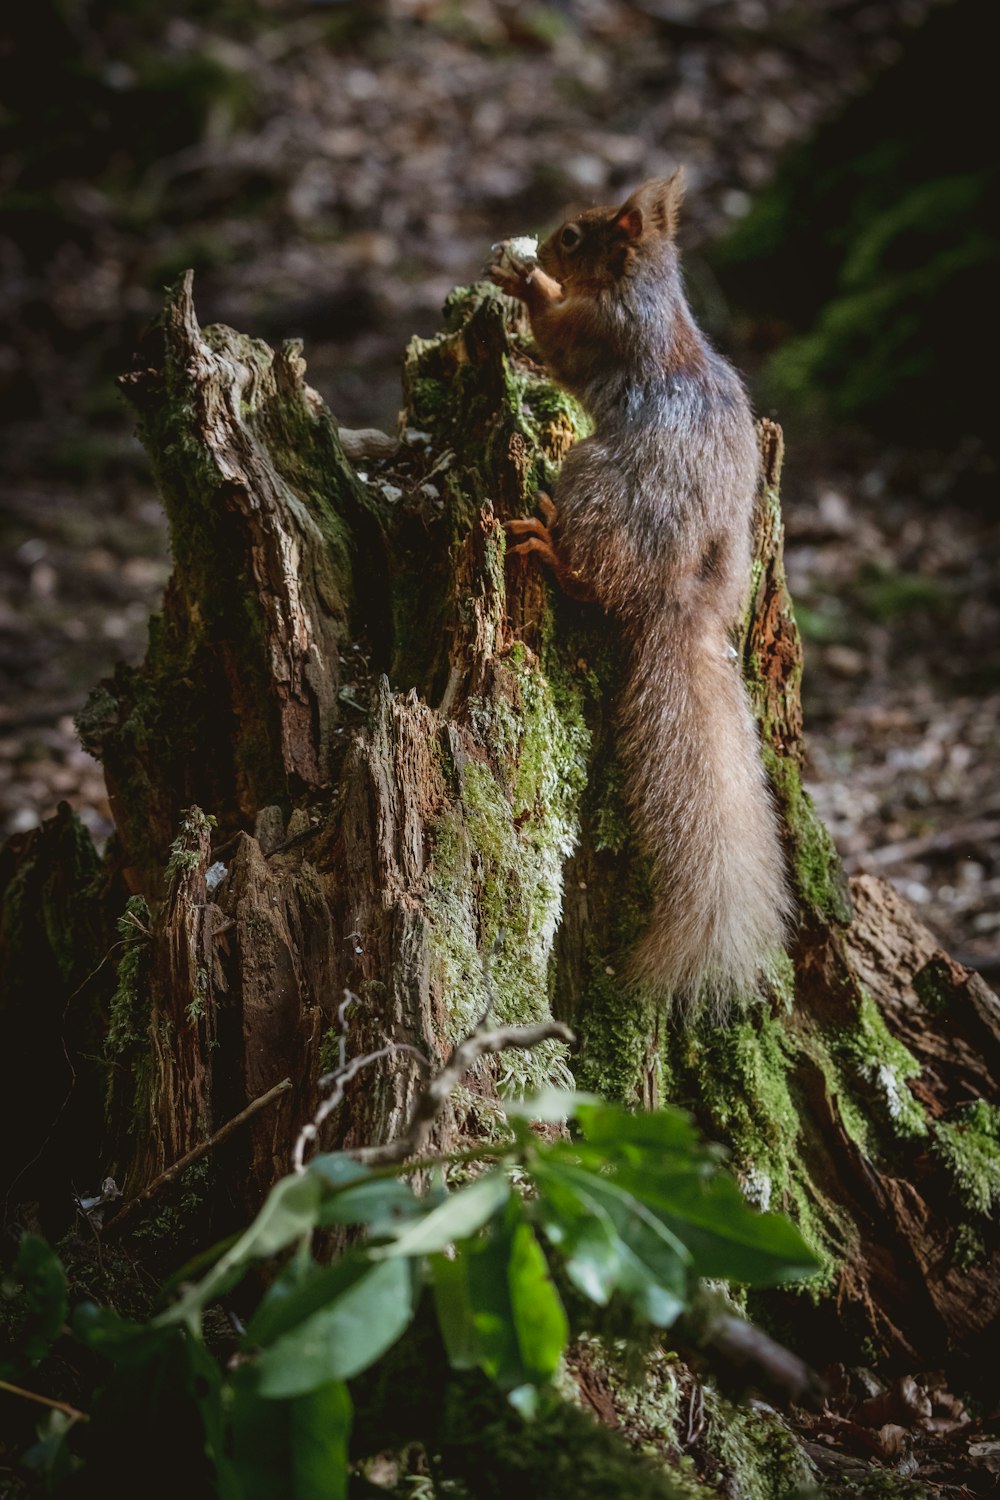 a squirrel standing on a tree stump